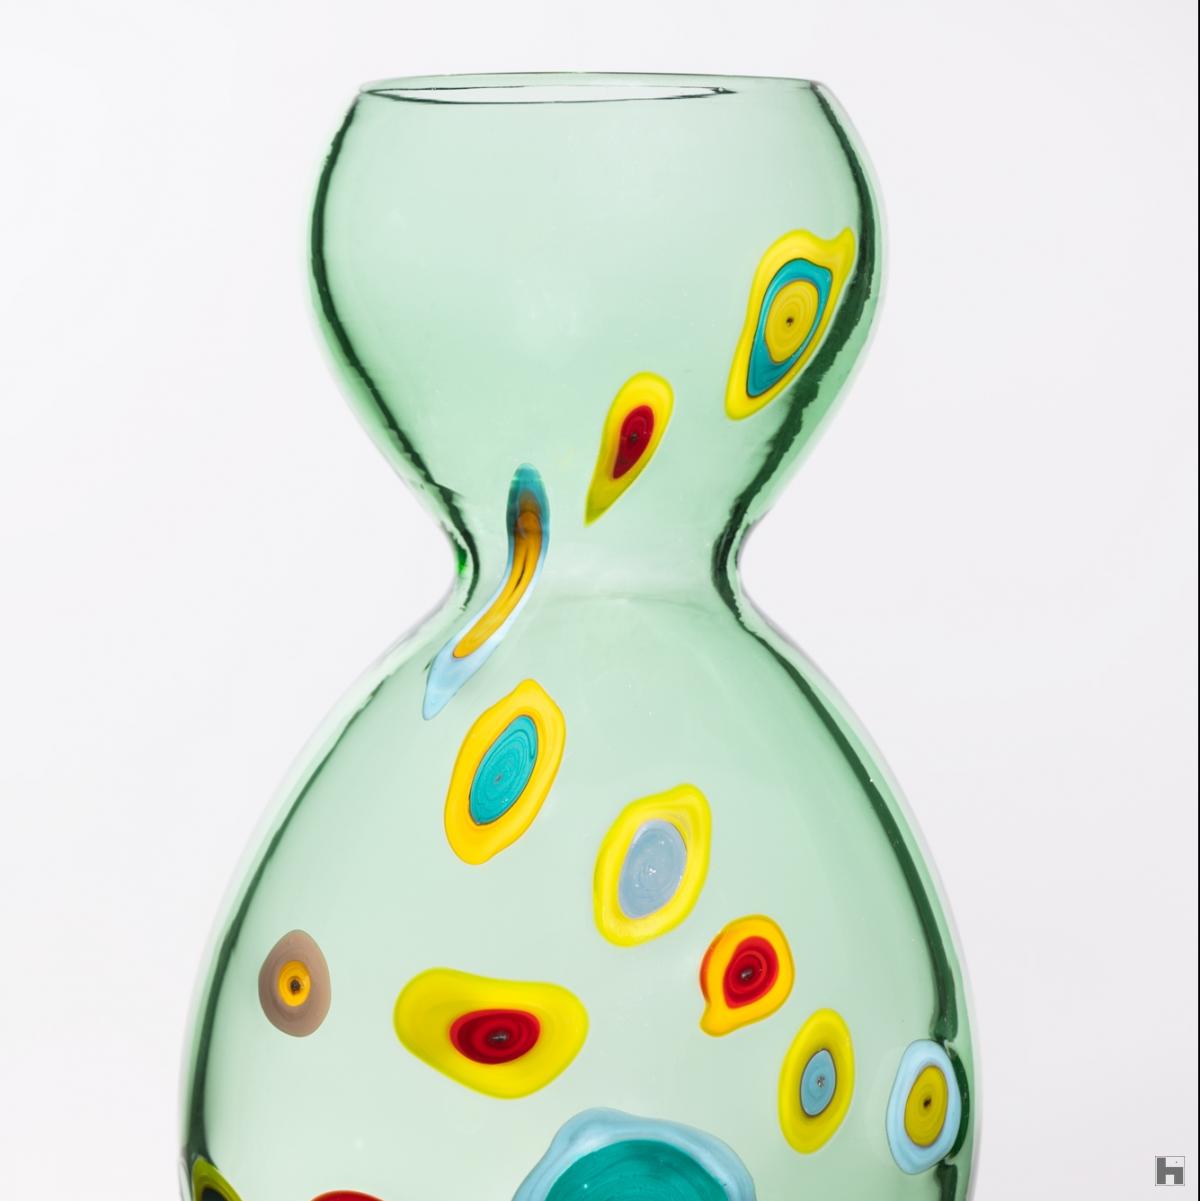 Seeds, mouth blown glass vessel made in collaboration with a glass master from Murano